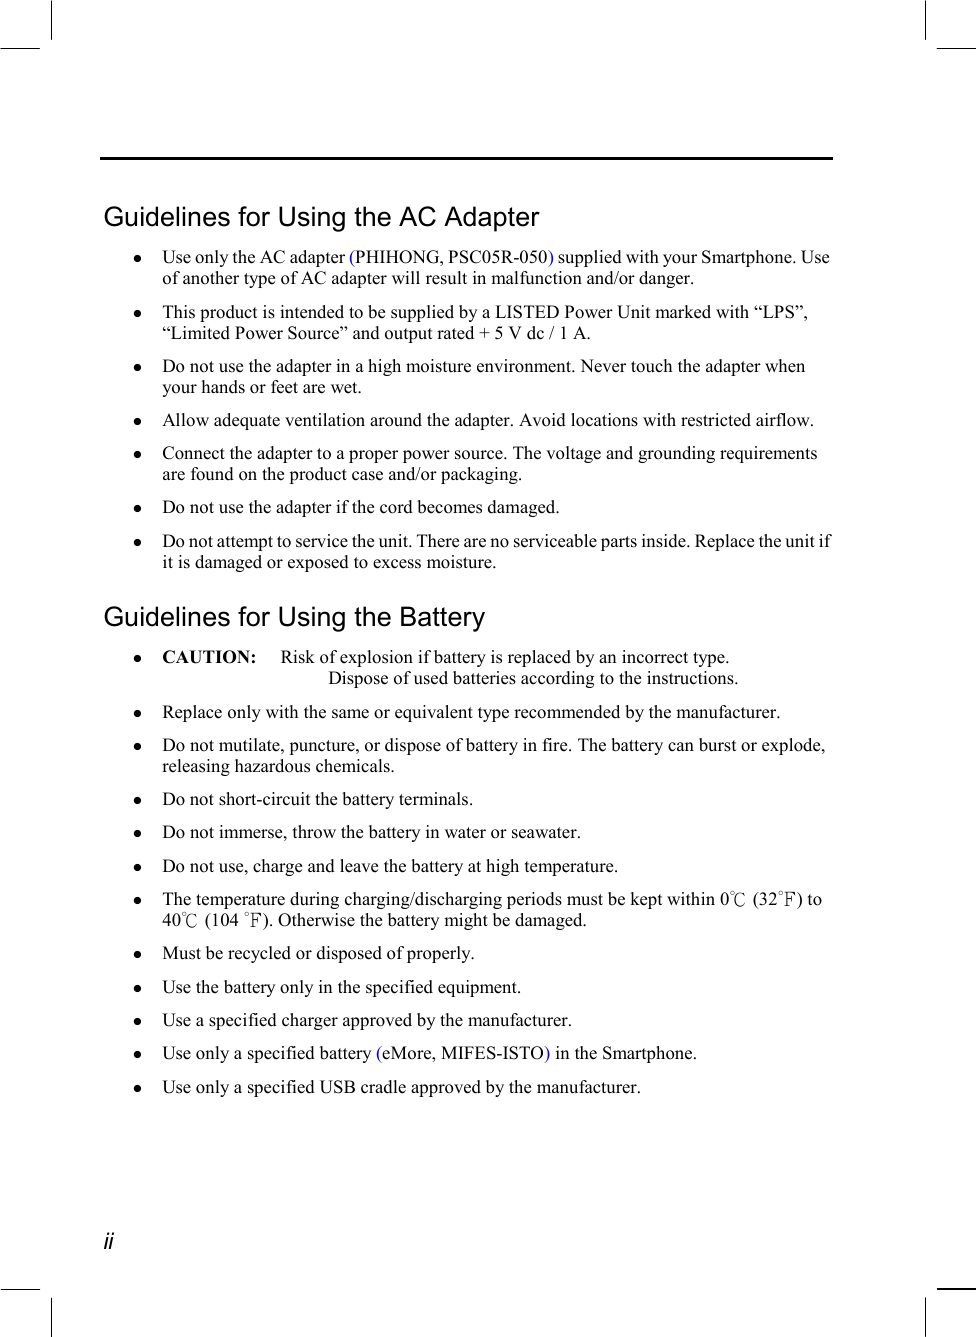  ii  Guidelines for Using the AC Adapter   Use only the AC adapter (PHIHONG, PSC05R-050) supplied with your Smartphone. Use of another type of AC adapter will result in malfunction and/or danger.   This product is intended to be supplied by a LISTED Power Unit marked with “LPS”, “Limited Power Source” and output rated + 5 V dc / 1 A.   Do not use the adapter in a high moisture environment. Never touch the adapter when your hands or feet are wet.   Allow adequate ventilation around the adapter. Avoid locations with restricted airflow.   Connect the adapter to a proper power source. The voltage and grounding requirements are found on the product case and/or packaging.   Do not use the adapter if the cord becomes damaged.   Do not attempt to service the unit. There are no serviceable parts inside. Replace the unit if it is damaged or exposed to excess moisture. Guidelines for Using the Battery   CAUTION:  Risk of explosion if battery is replaced by an incorrect type.     Dispose of used batteries according to the instructions.   Replace only with the same or equivalent type recommended by the manufacturer.   Do not mutilate, puncture, or dispose of battery in fire. The battery can burst or explode, releasing hazardous chemicals.   Do not short-circuit the battery terminals.    Do not immerse, throw the battery in water or seawater.   Do not use, charge and leave the battery at high temperature.   The temperature during charging/discharging periods must be kept within 0℃ (32℉) to 40℃ (104 ℉). Otherwise the battery might be damaged.   Must be recycled or disposed of properly.    Use the battery only in the specified equipment.   Use a specified charger approved by the manufacturer.   Use only a specified battery (eMore, MIFES-ISTO) in the Smartphone.   Use only a specified USB cradle approved by the manufacturer. 